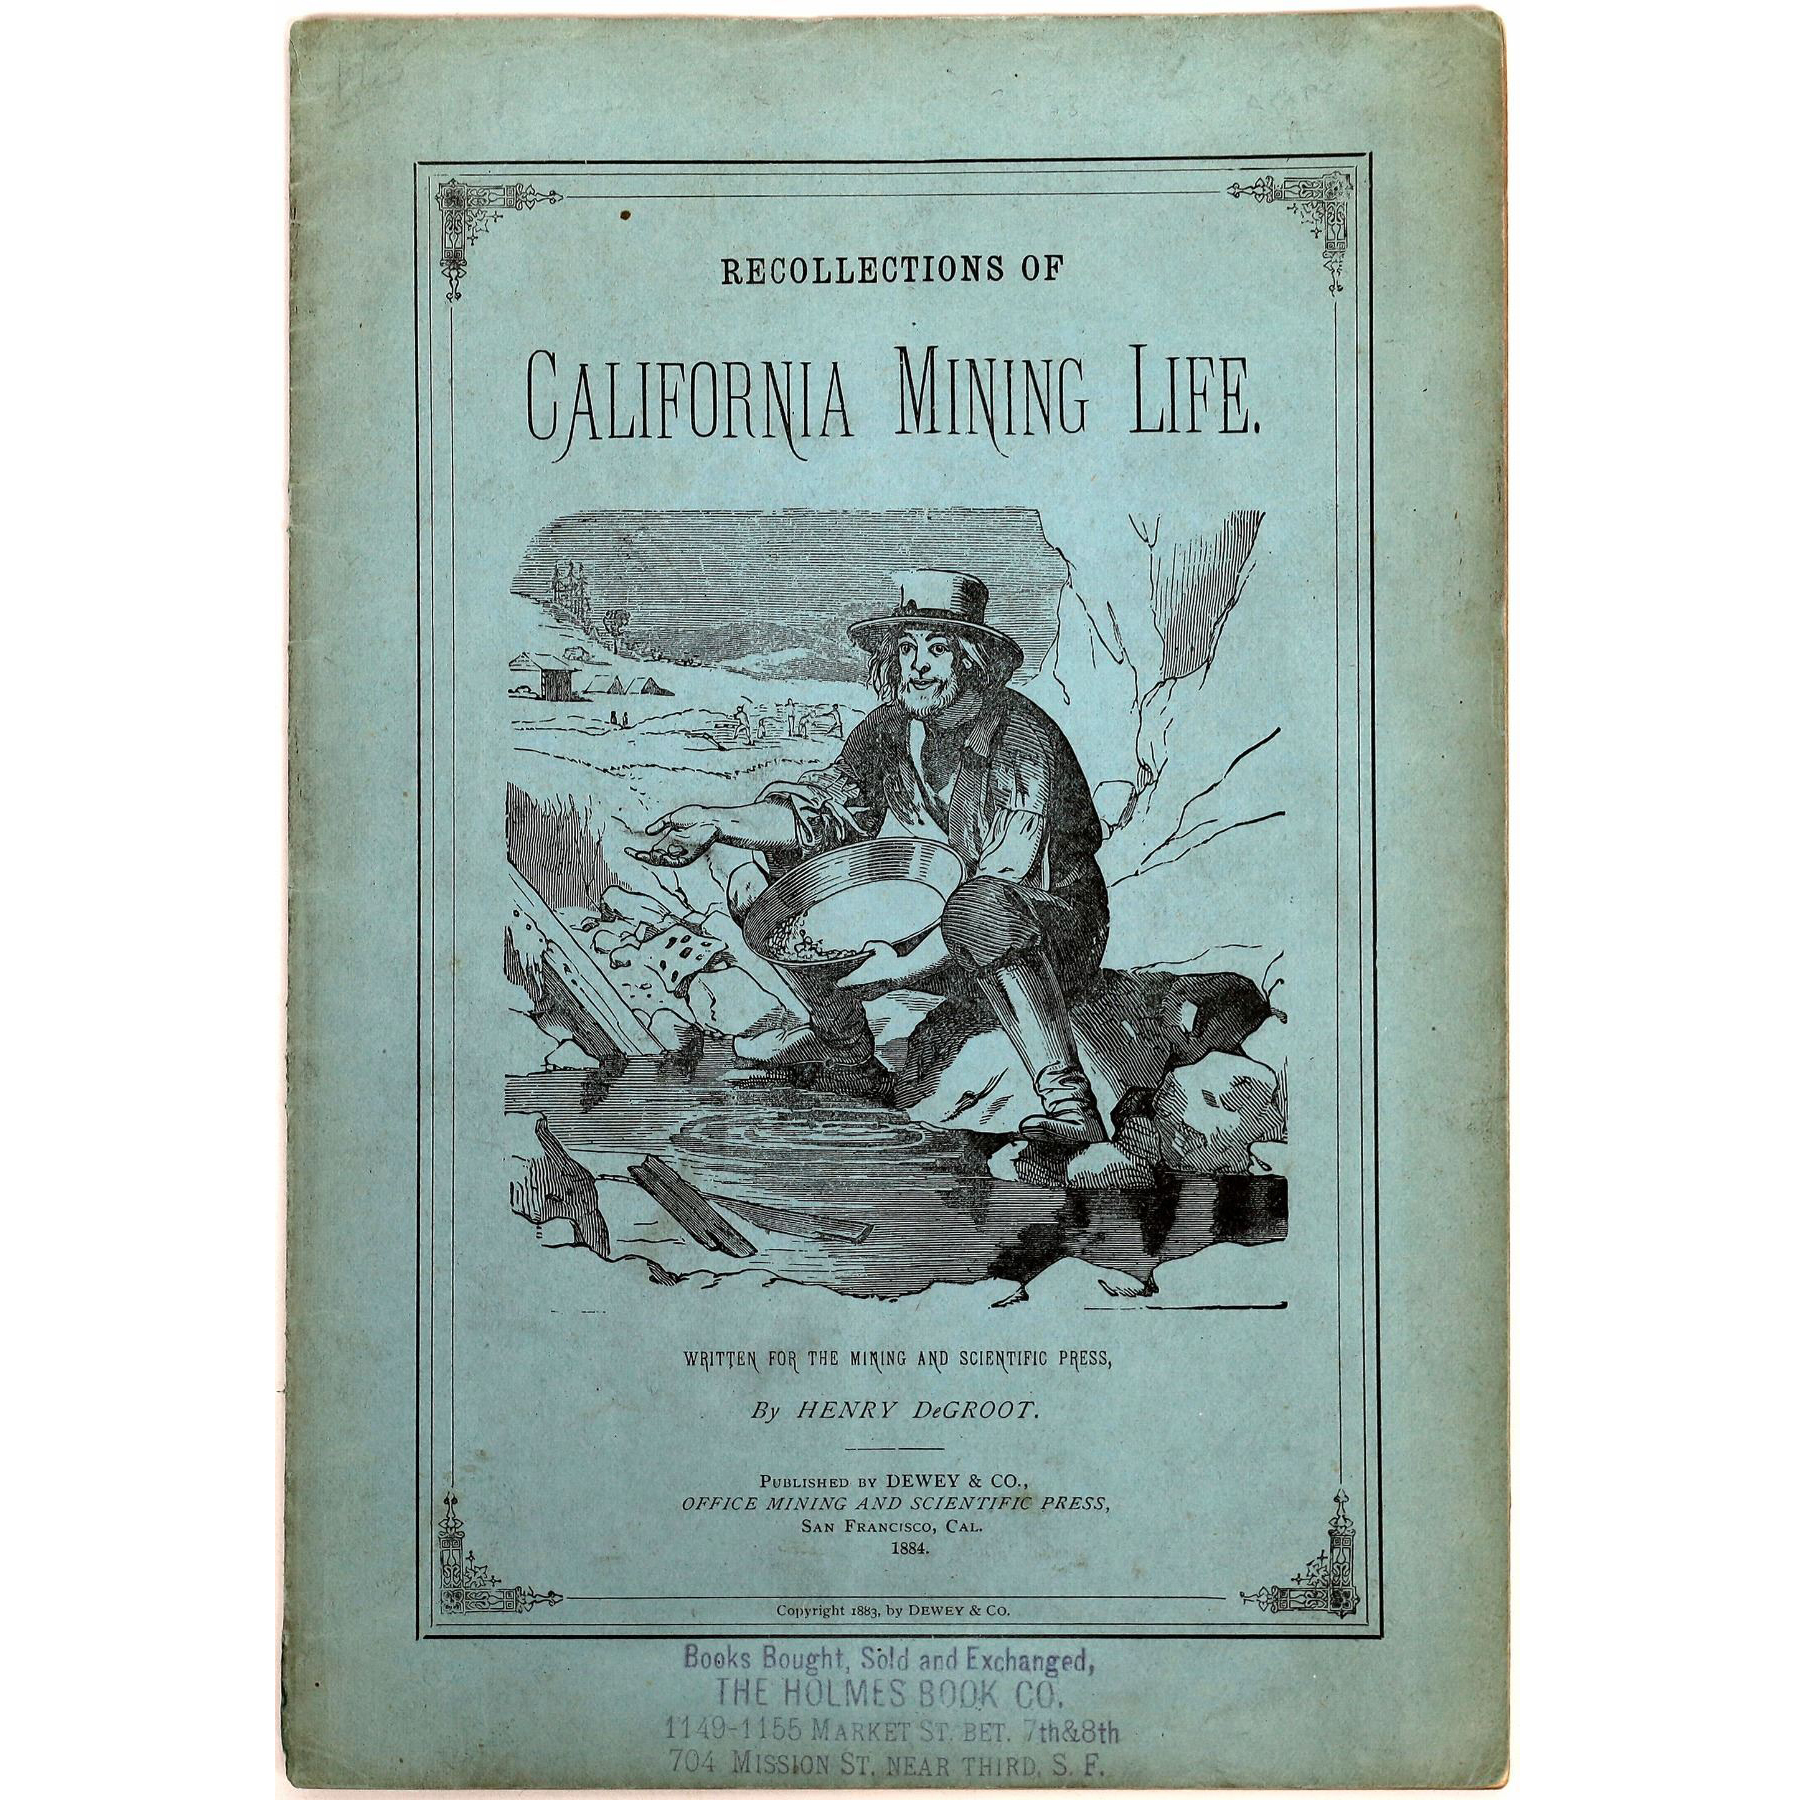 Copy of the 1884 book ‘Recollections of Mining Life’ by Henry DeGroot, $1,000